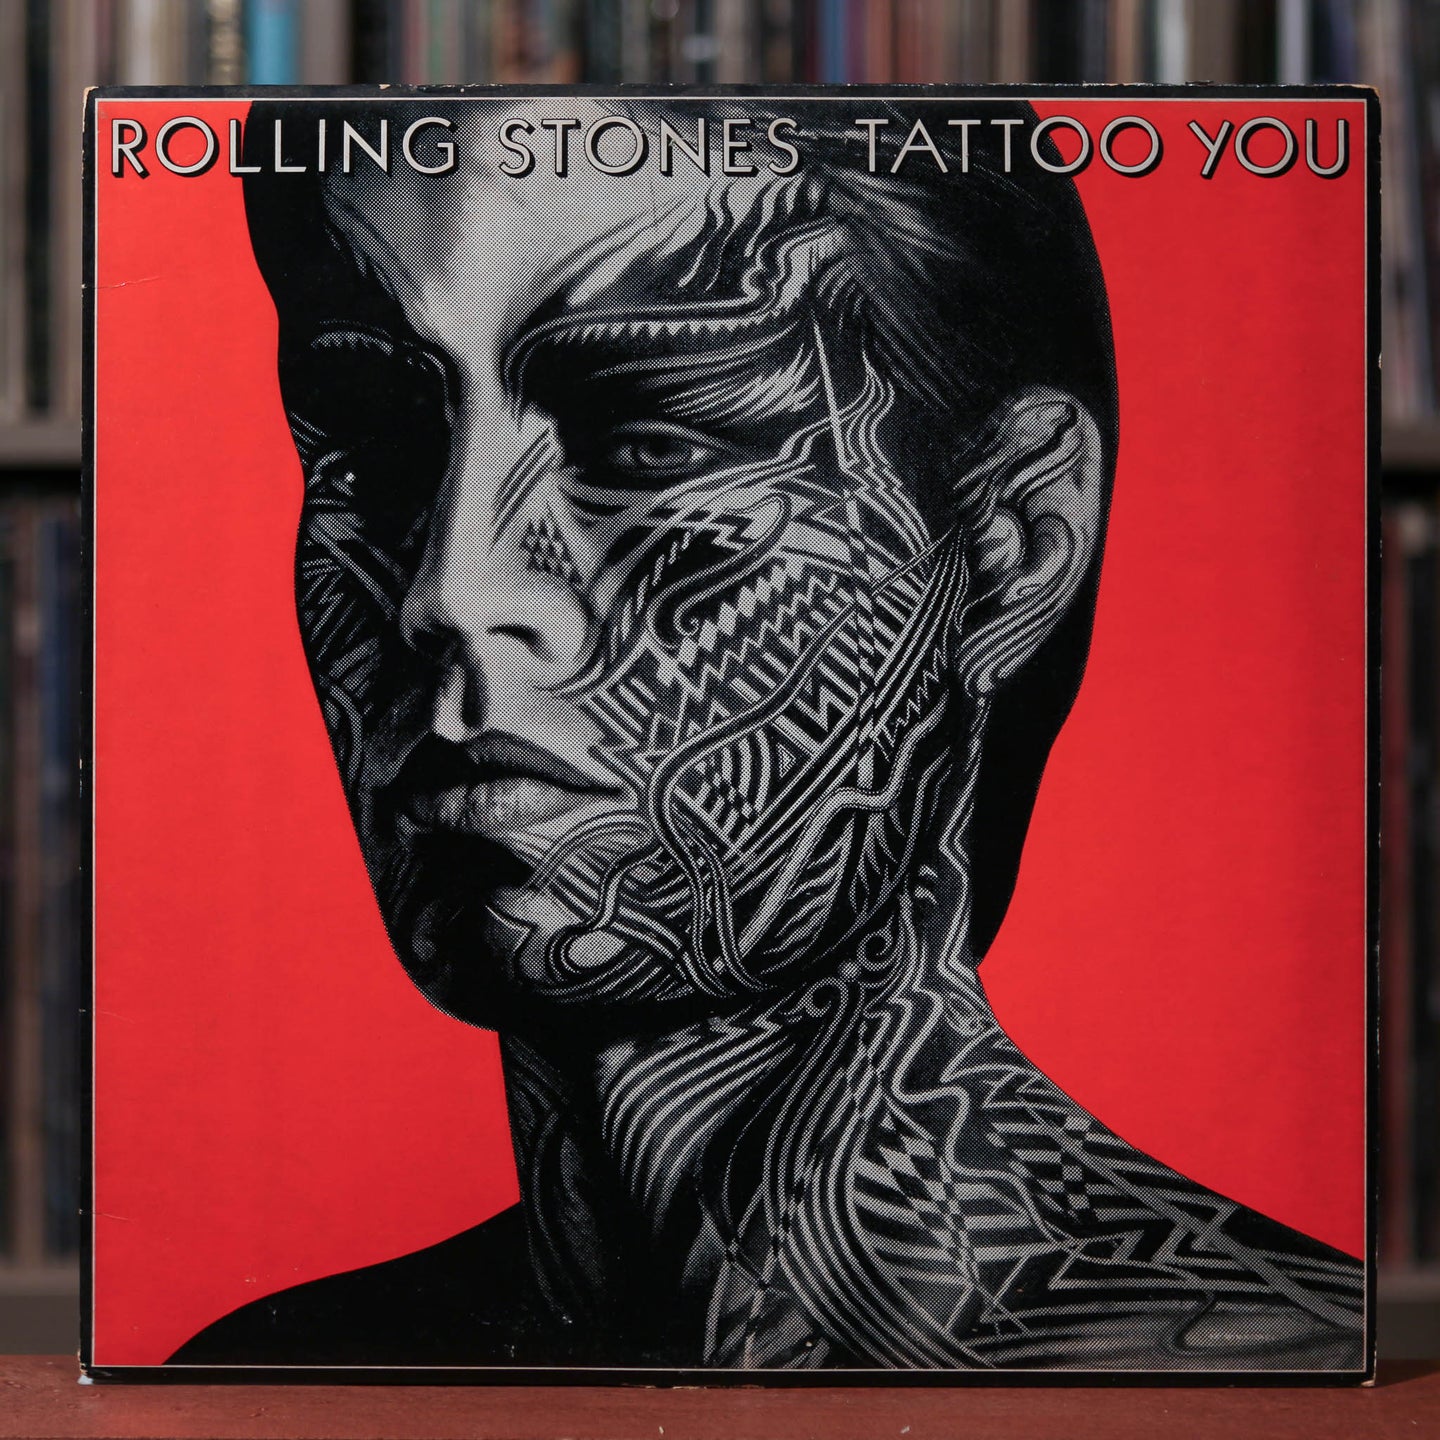 Rolling Stones - Tattoo You - 1981 Rolling Stones Records, VG+/VG+